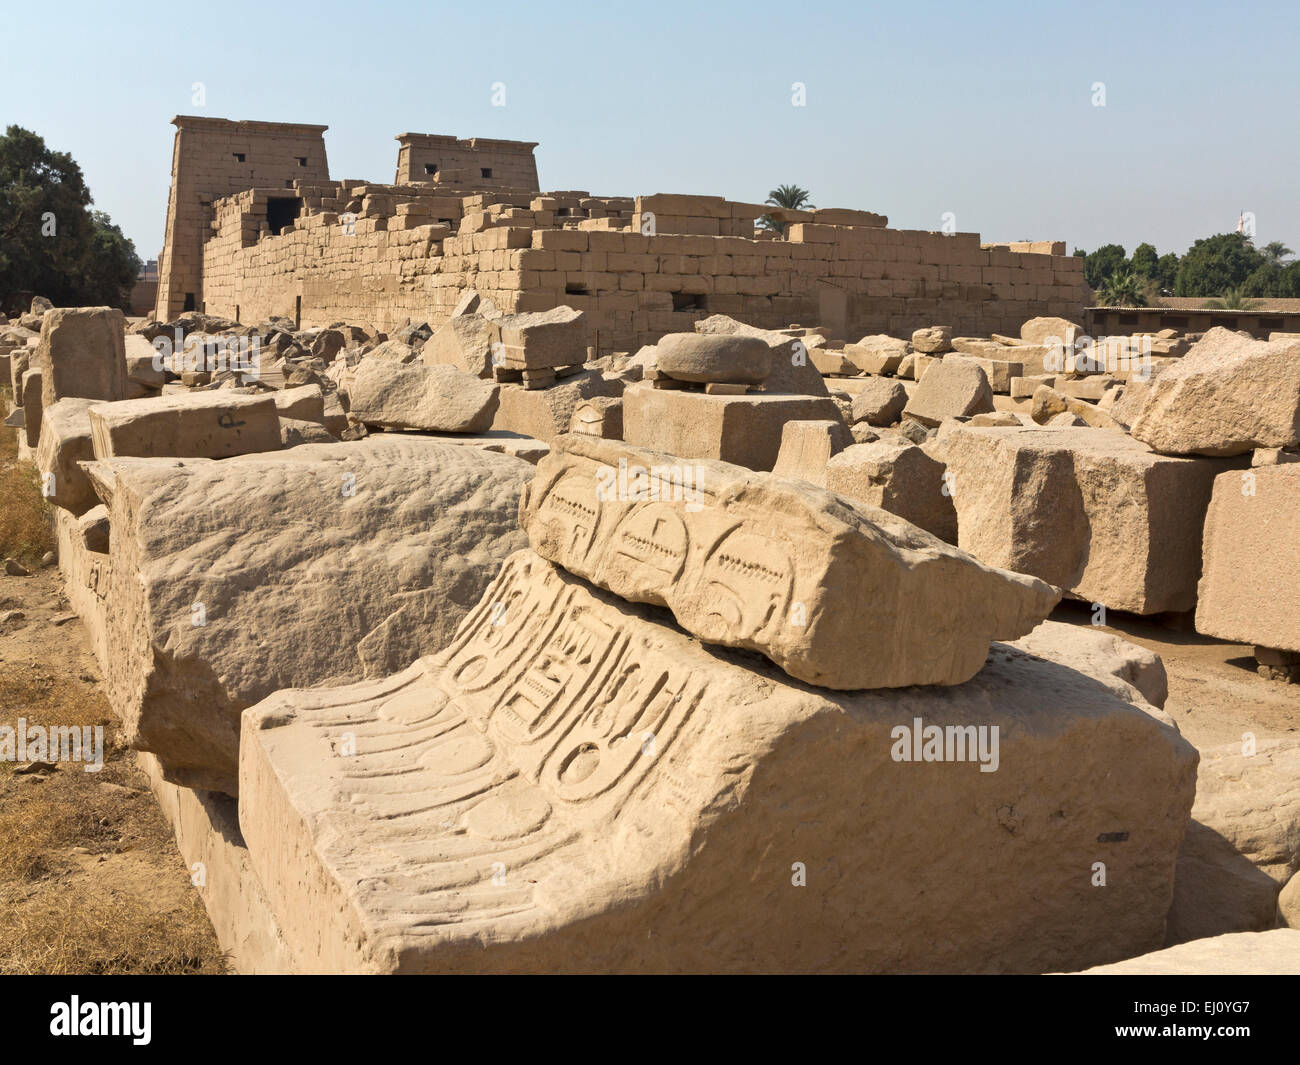 View over magazines of broken blocks to the Temple of Khonsu at the Temple of Karnak, Luxor Egypt Stock Photo